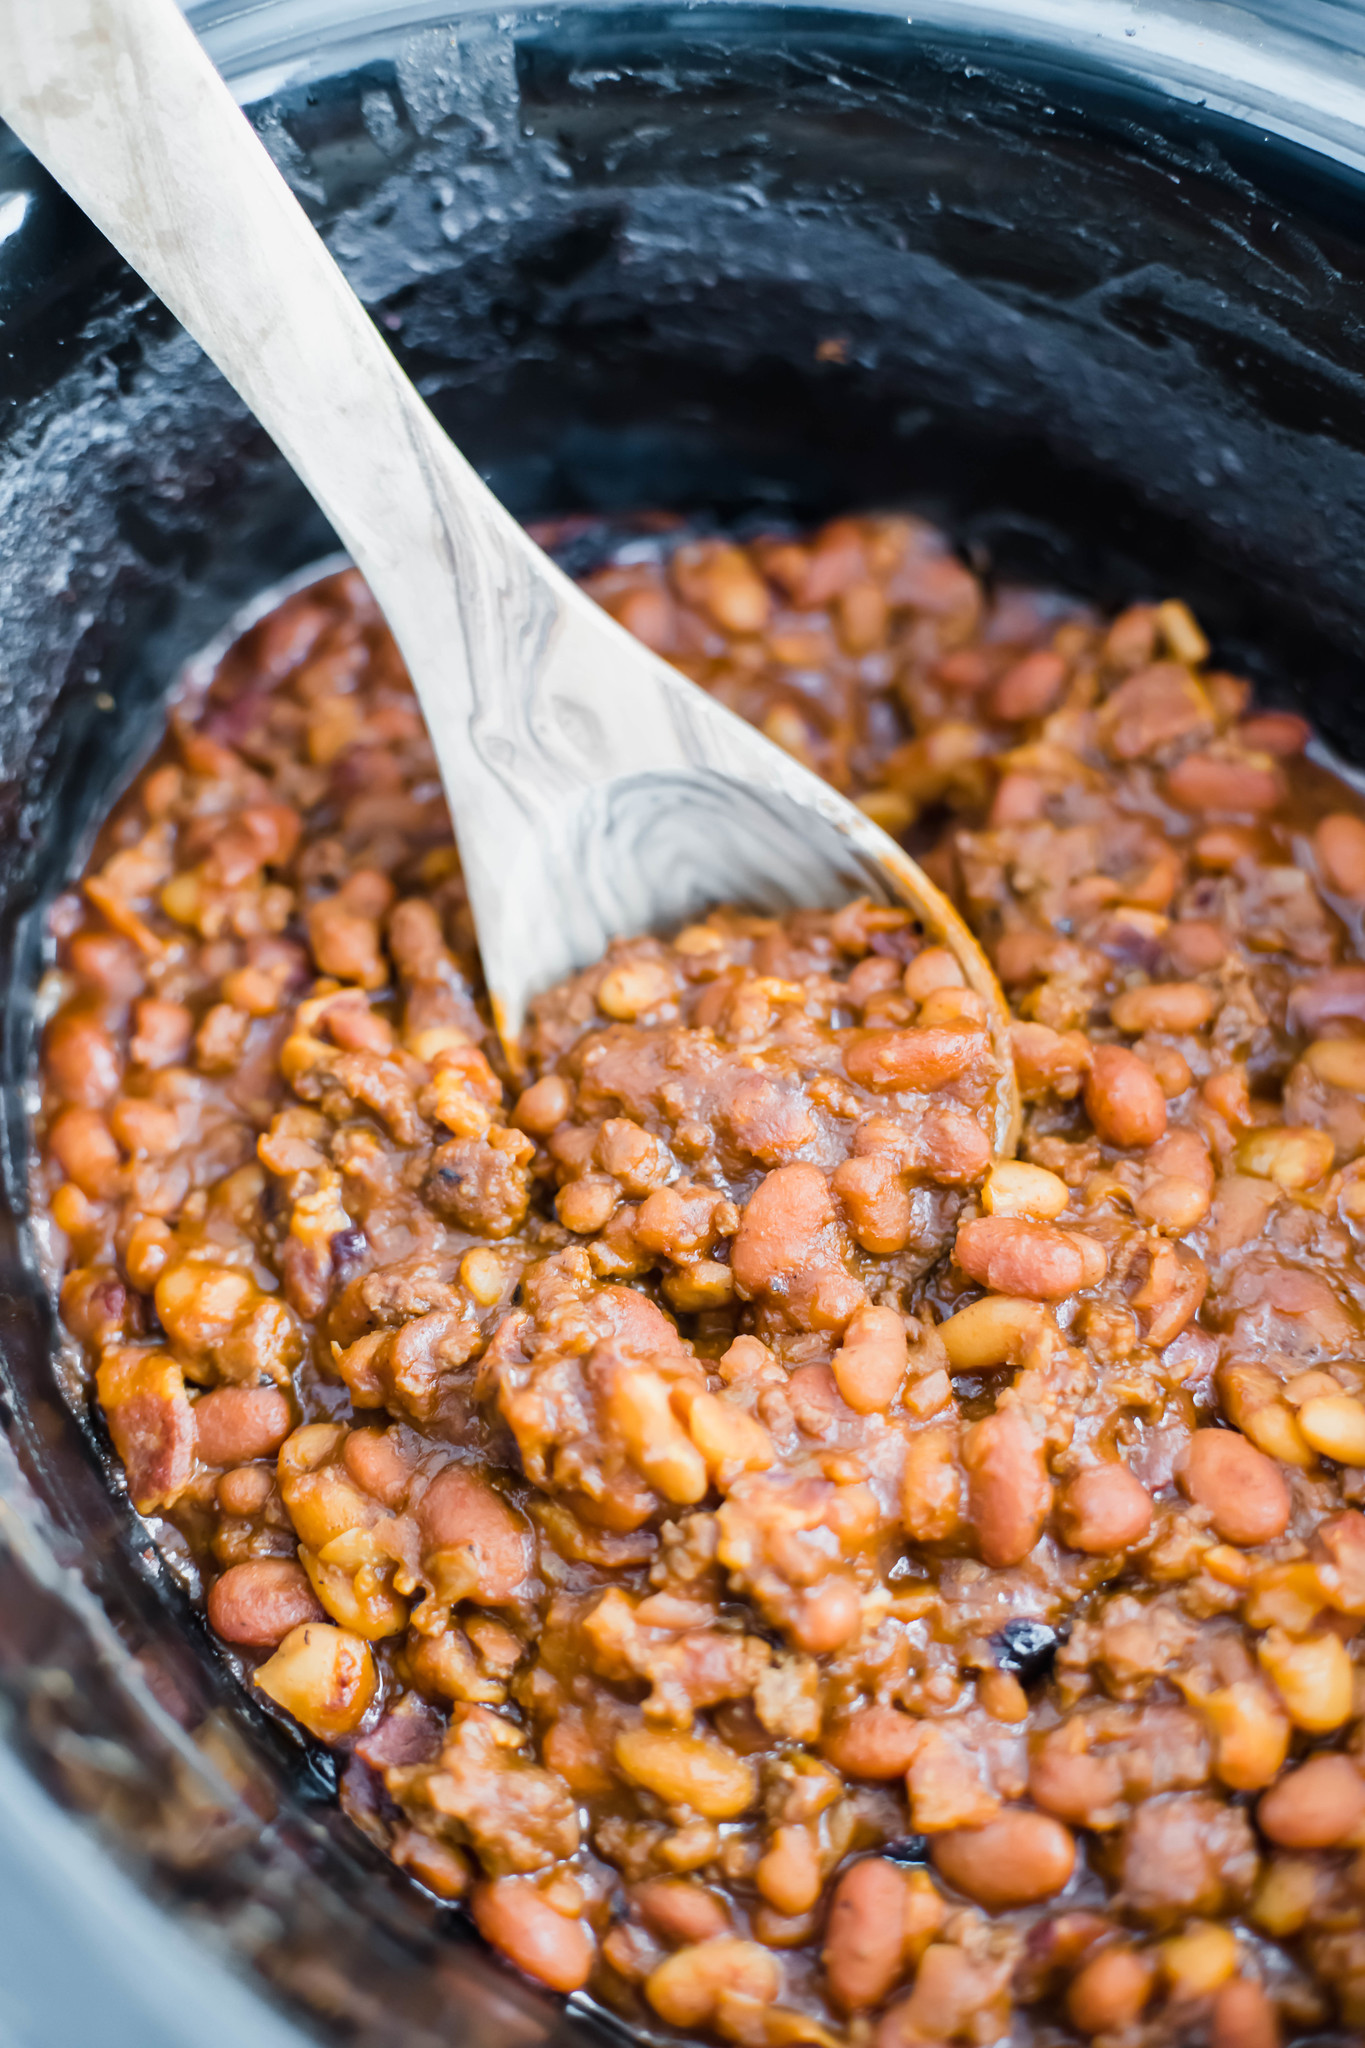 Wooden ladle in slow cooker filled with cowboy baked beans.